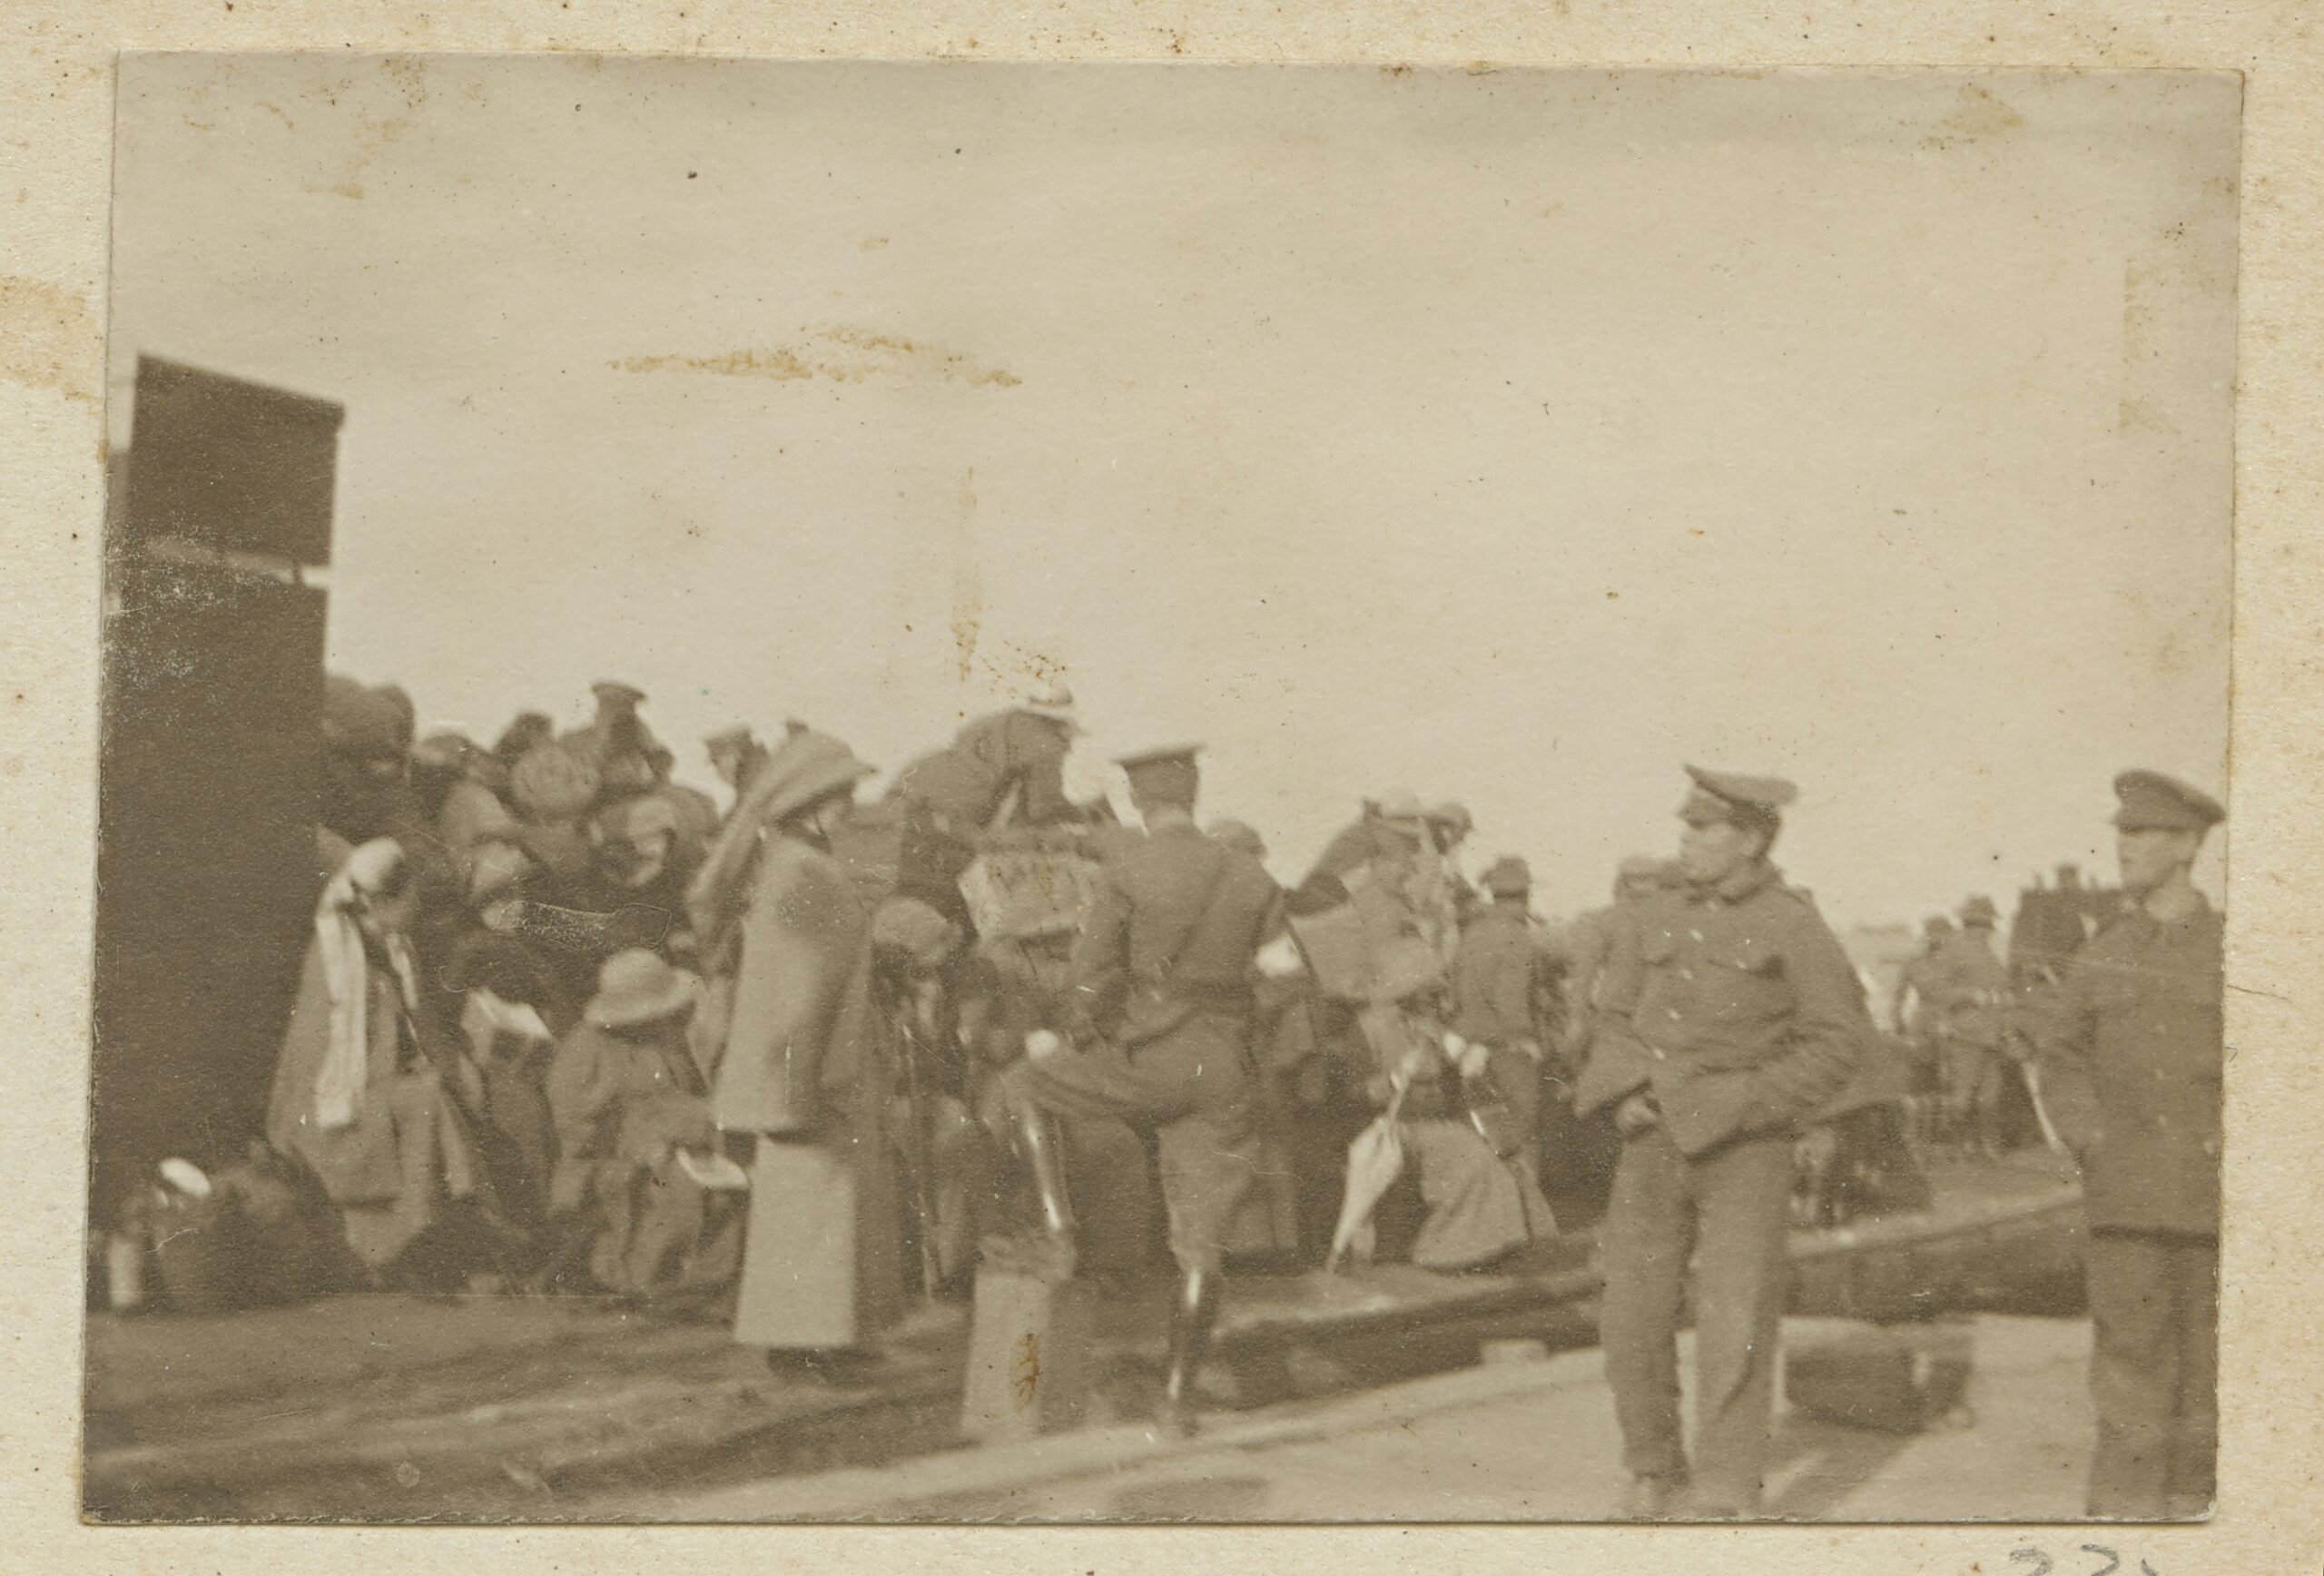 A crowd of nurses and soldiers are outside, shifting luggage or overlooking the activity.